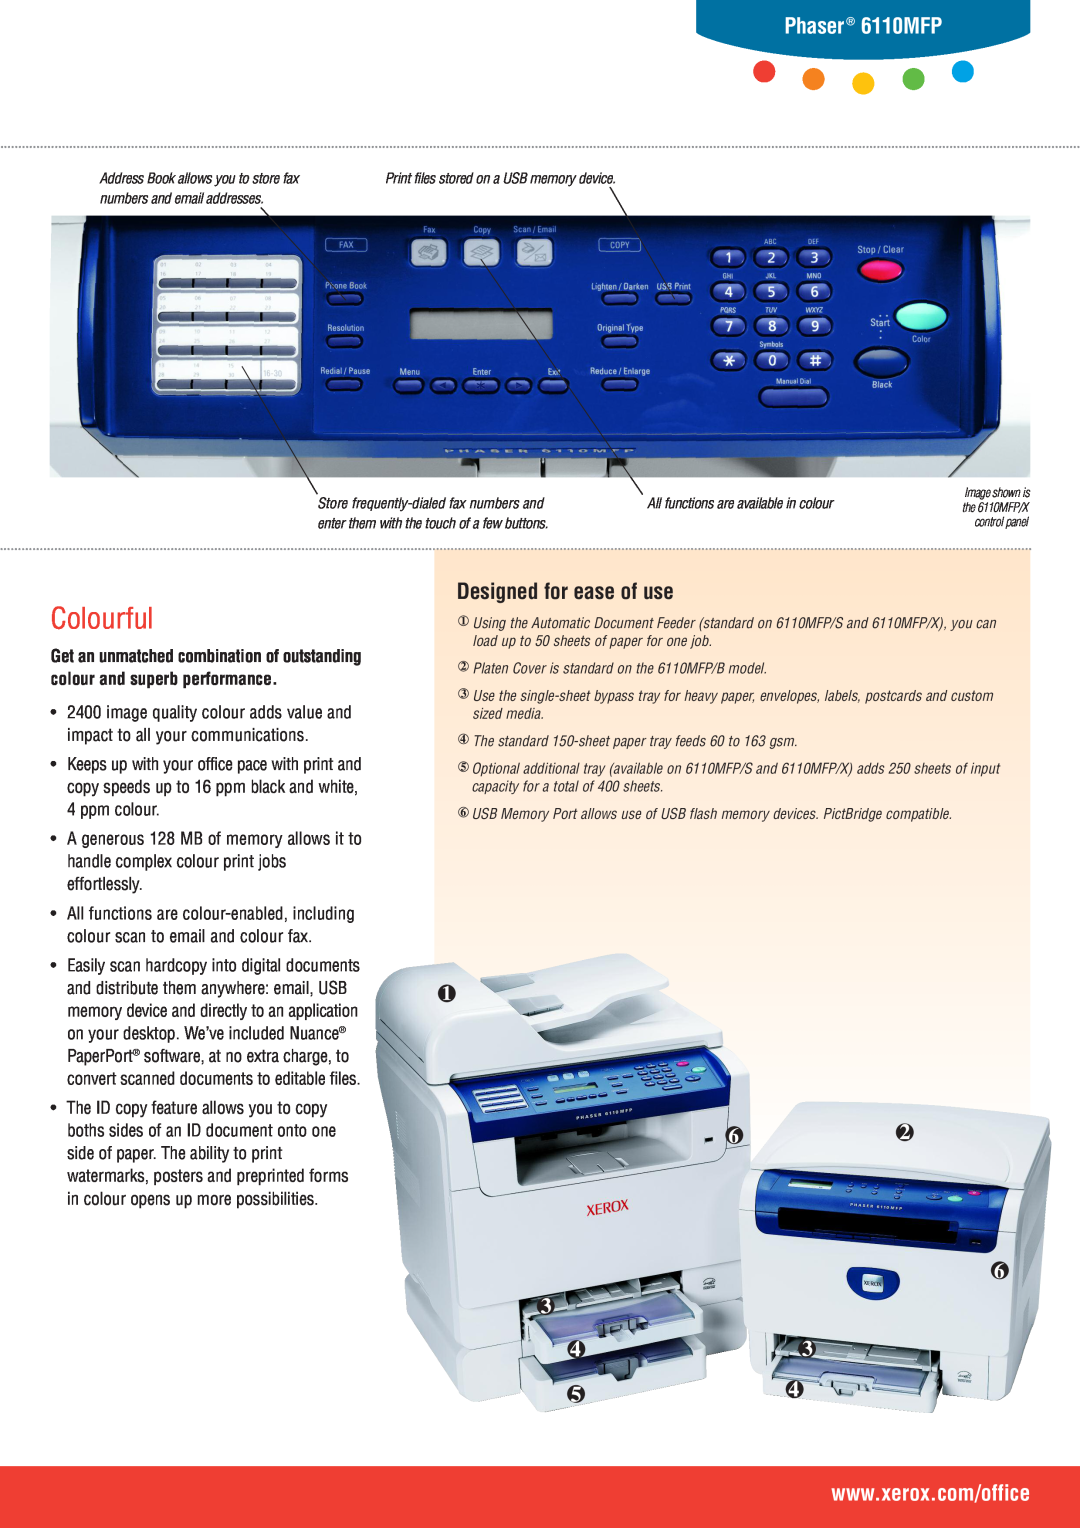 Xerox manual Colourful, Phaser 6110MFP, Designed for ease of use 